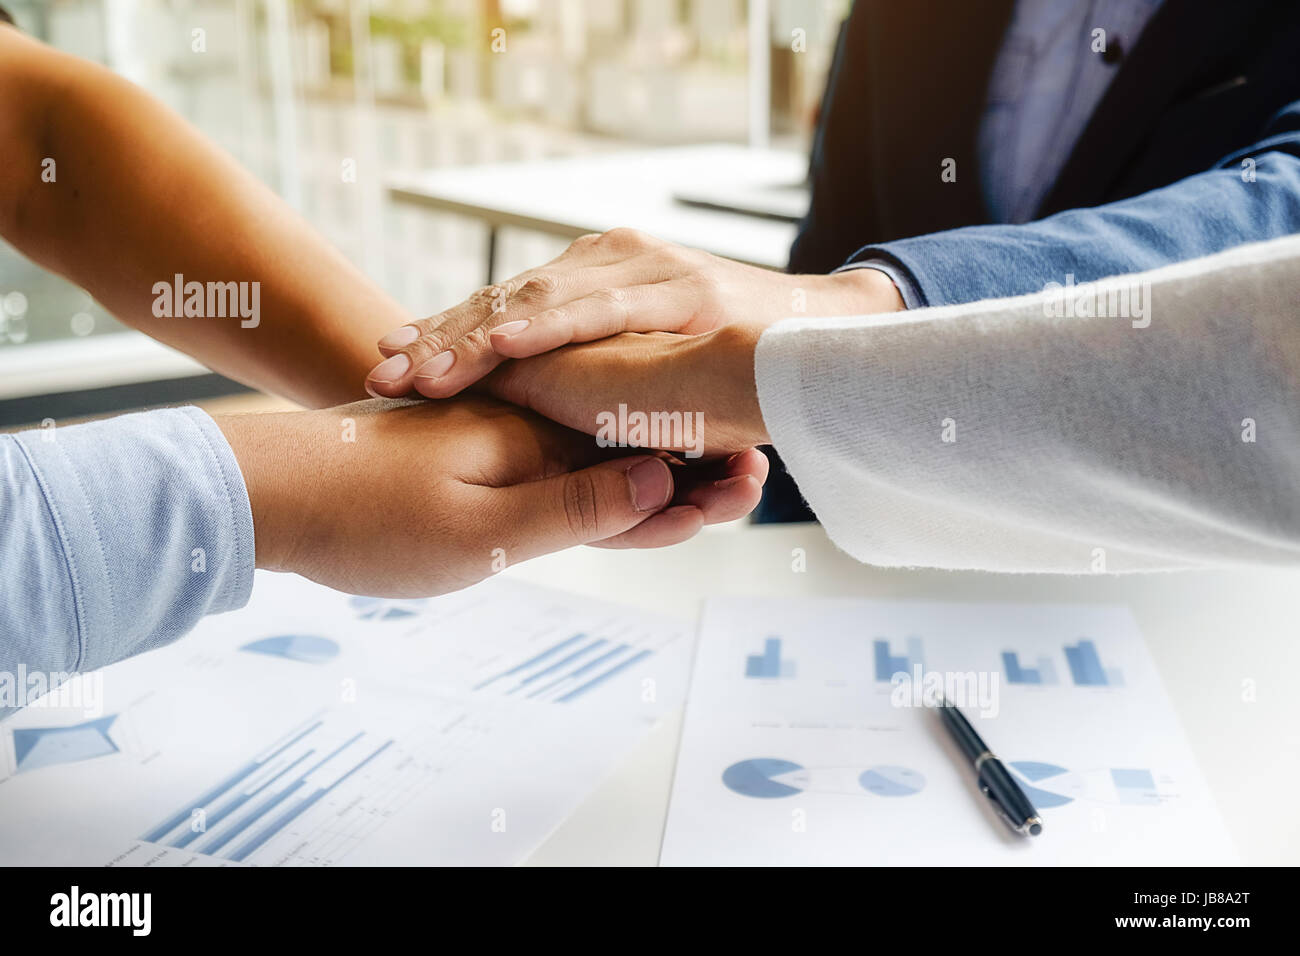 Teamwork Join Hands Support Together Concept. Business Team Coworker Brainstorming Meeting Concept Stock Photo